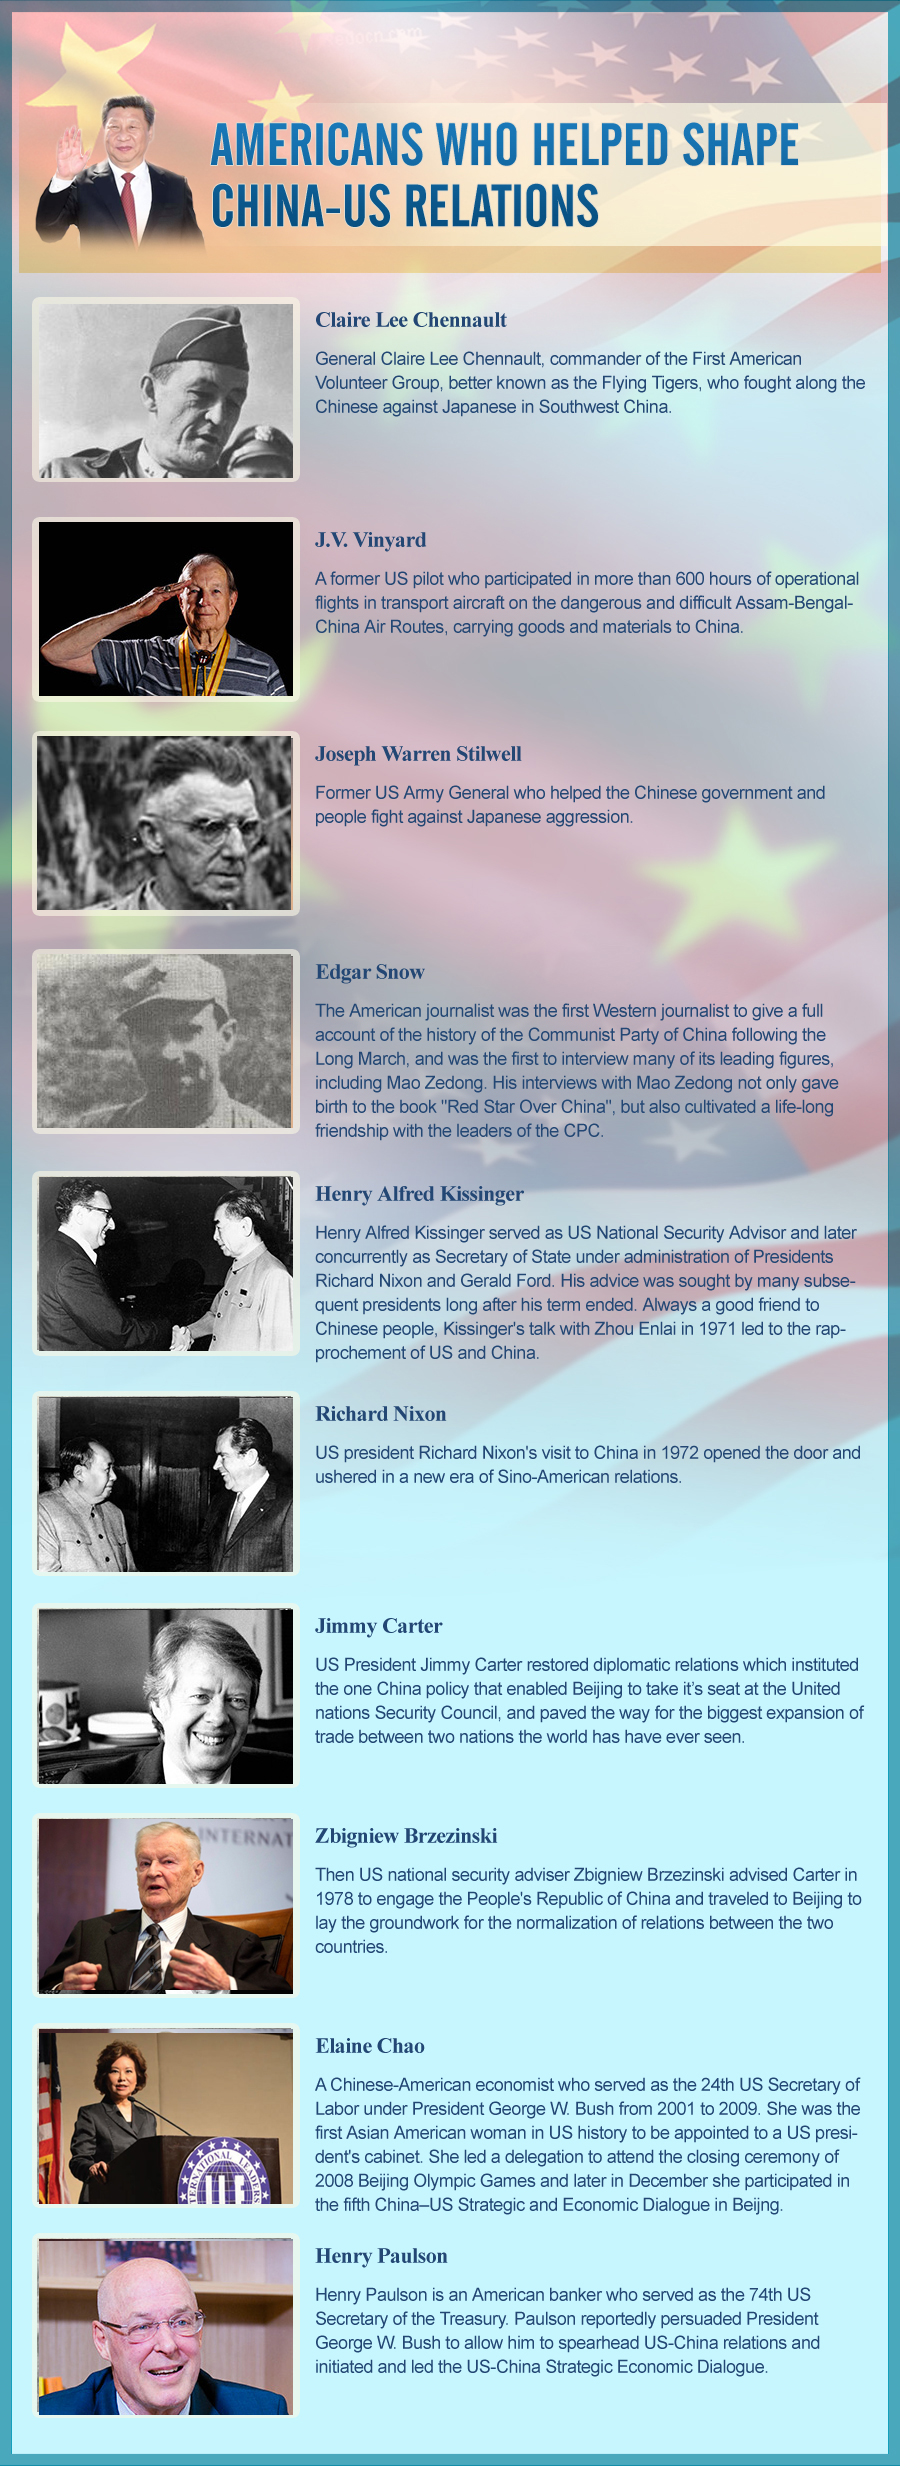 Americans who helped shape China-US relations